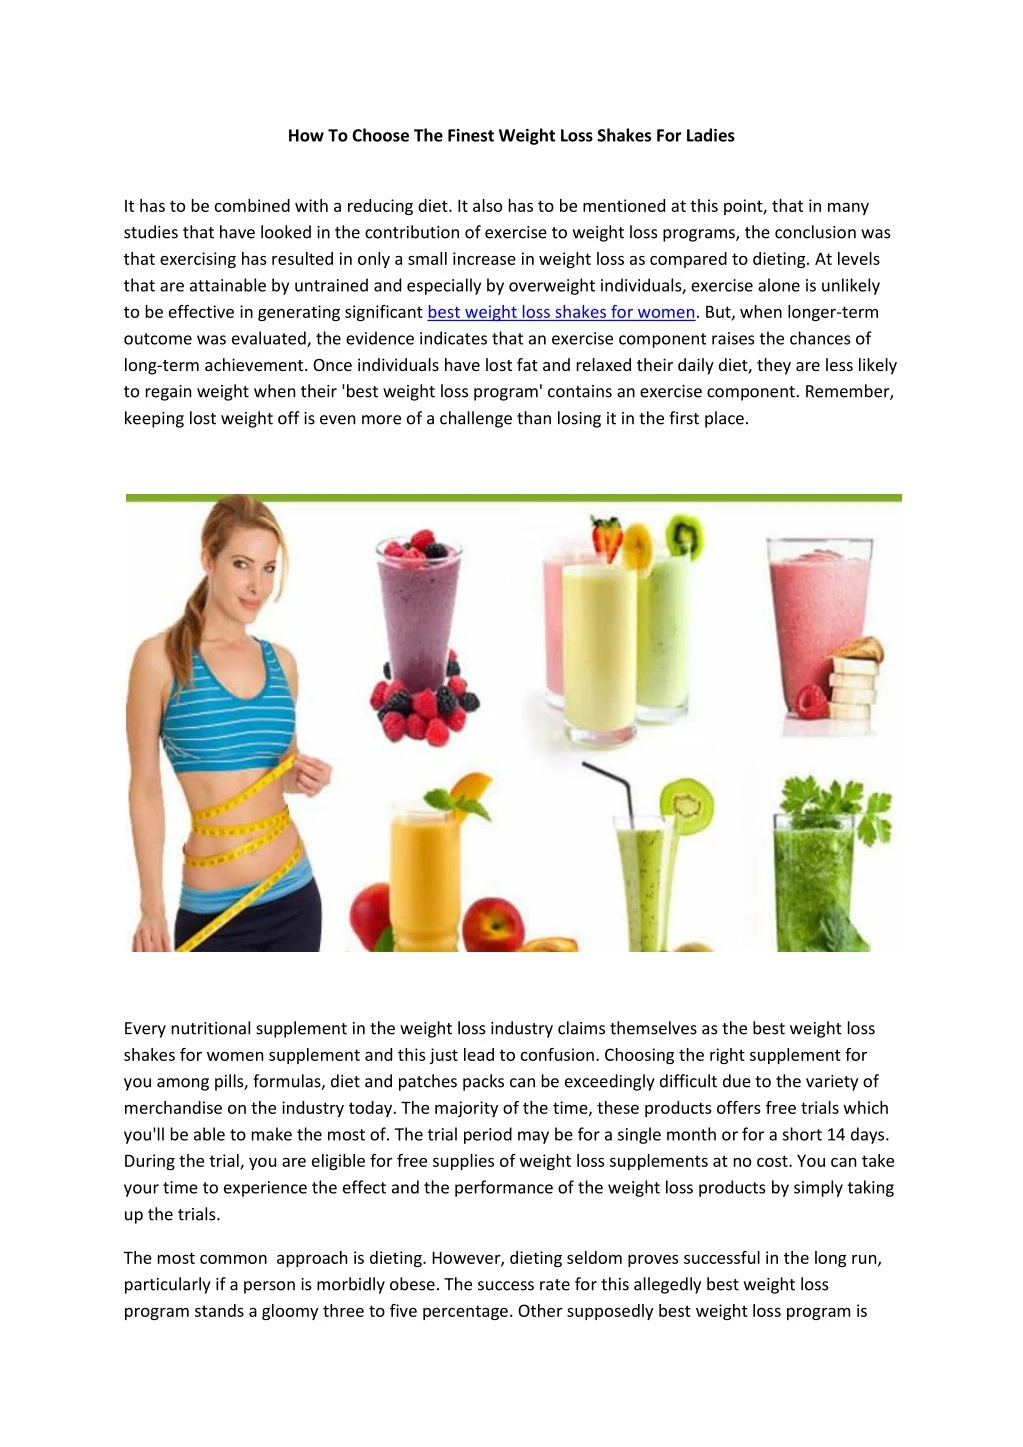 how to choose the finest weight loss shakes